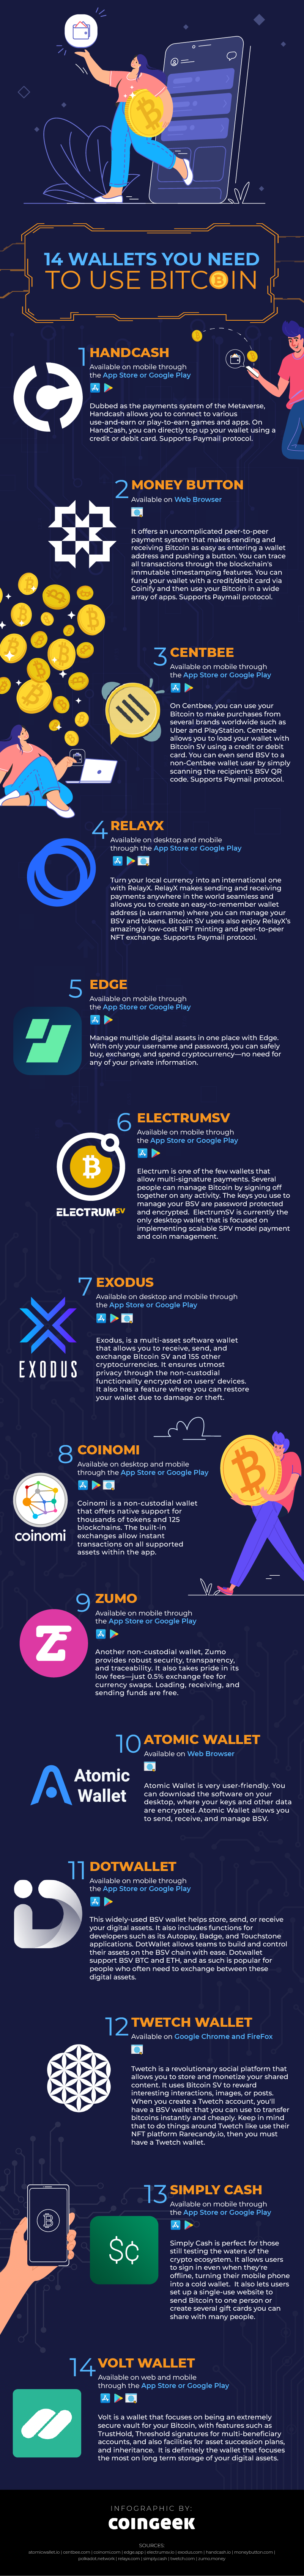 Infographic 14 walltes you need to use bitcoin